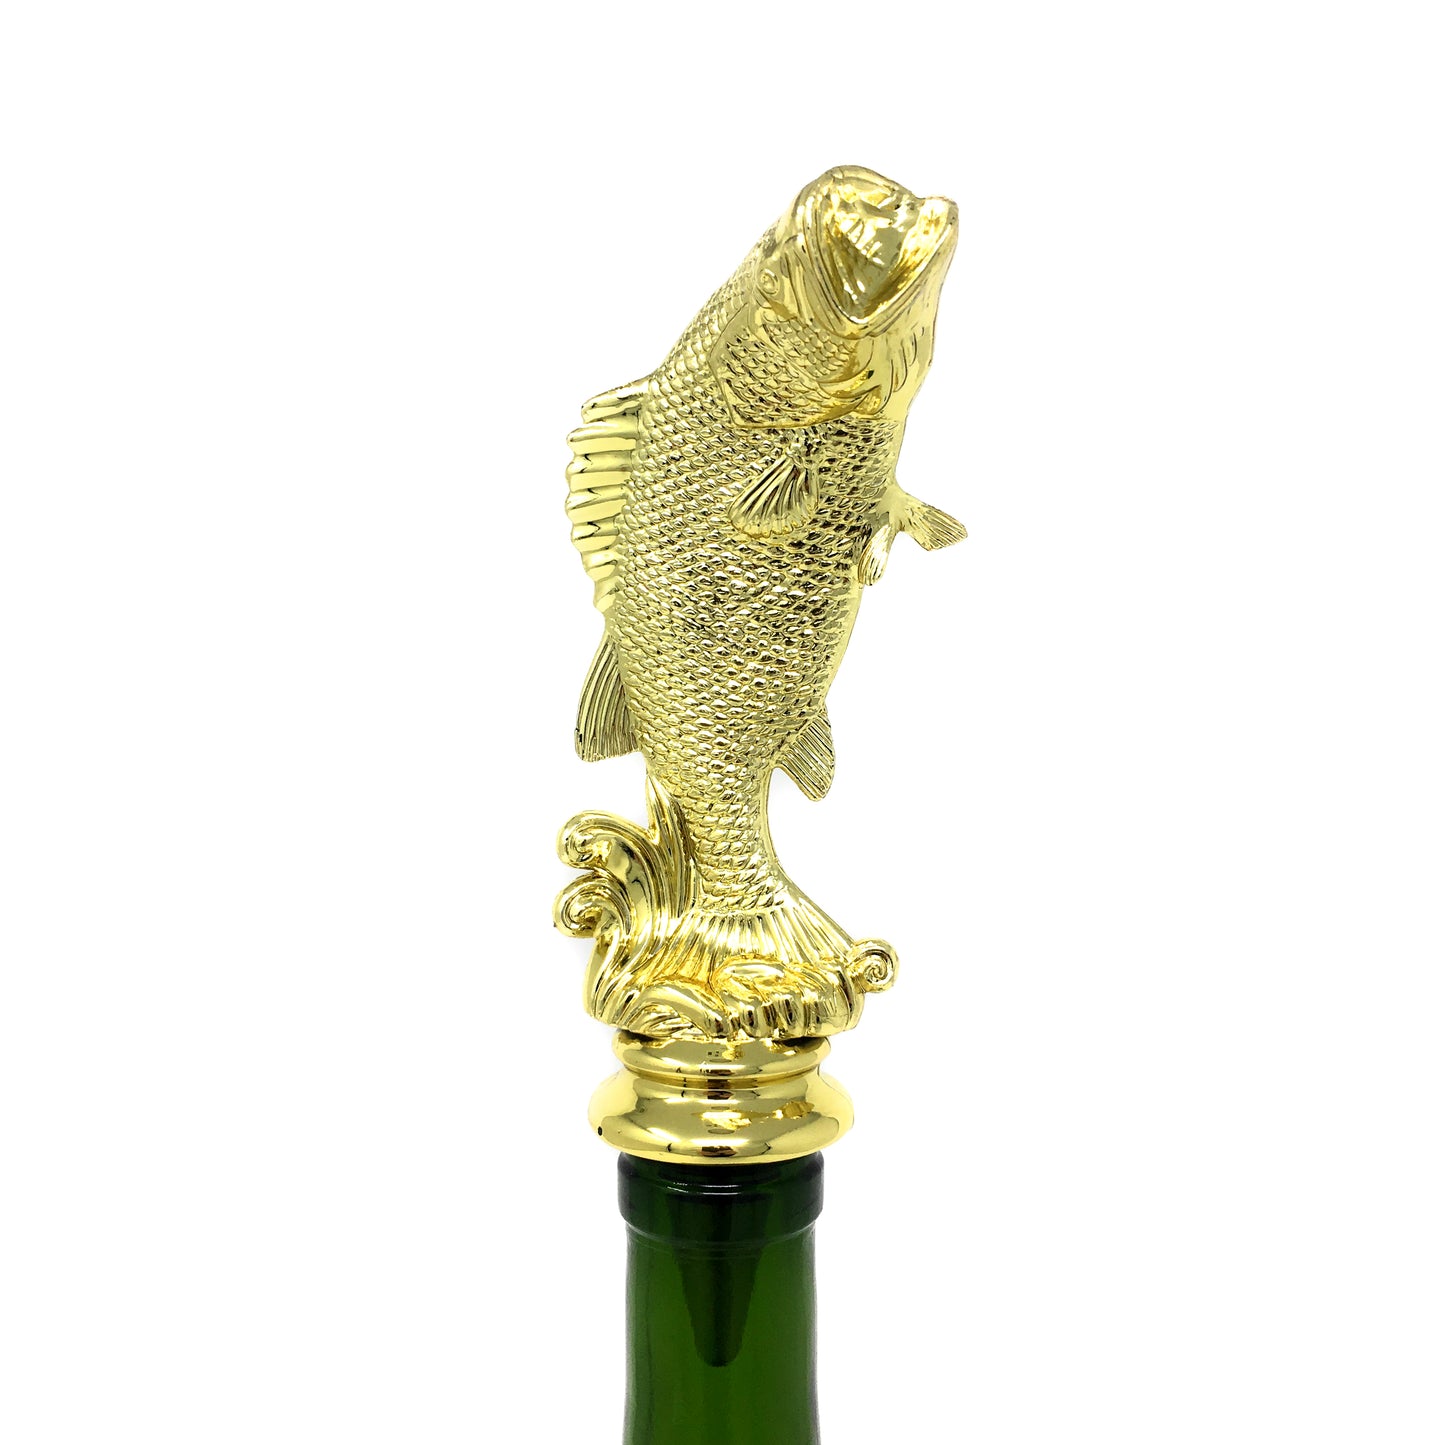 Bass Trophy Wine Bottle Stopper with Stainless Steel Base